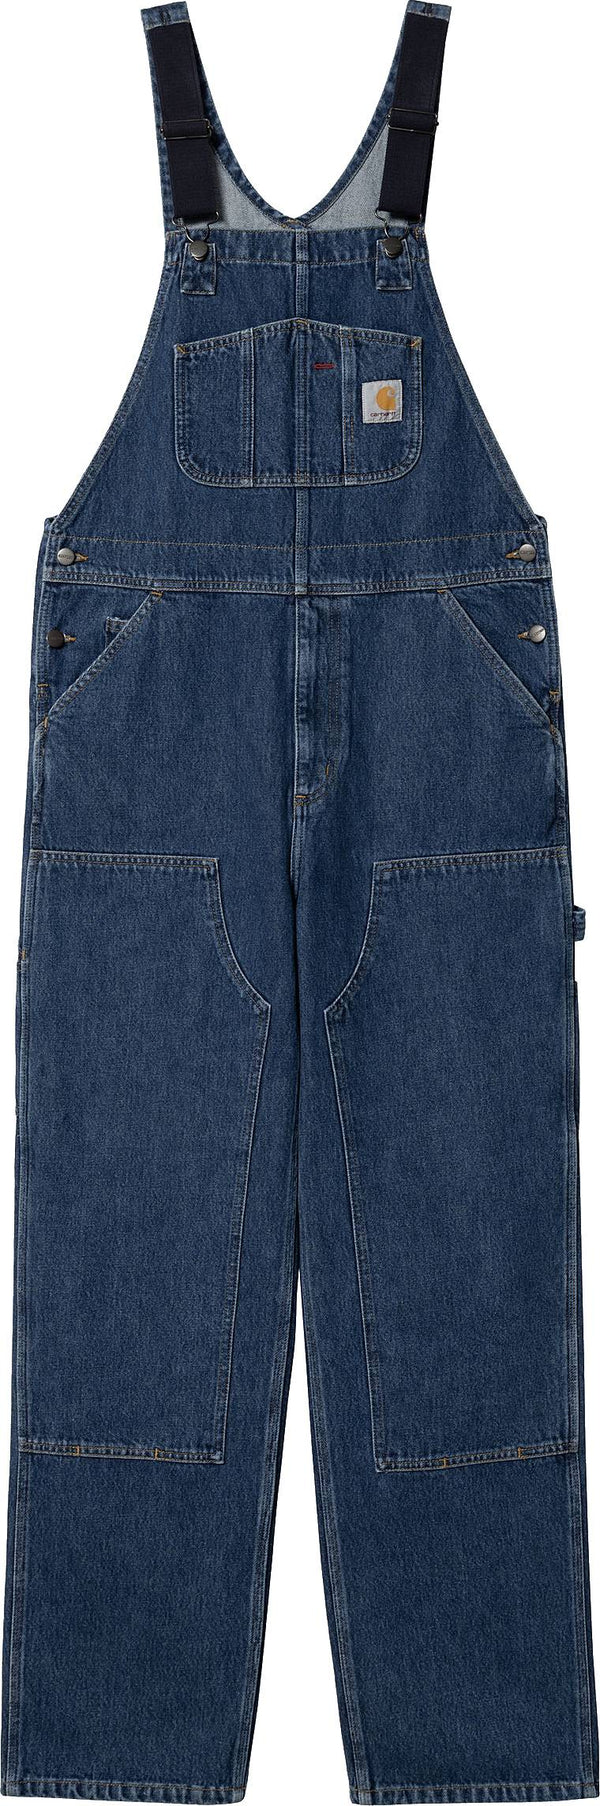 Carhartt Wip salopette Double Knee Bib Overall blue stone washed